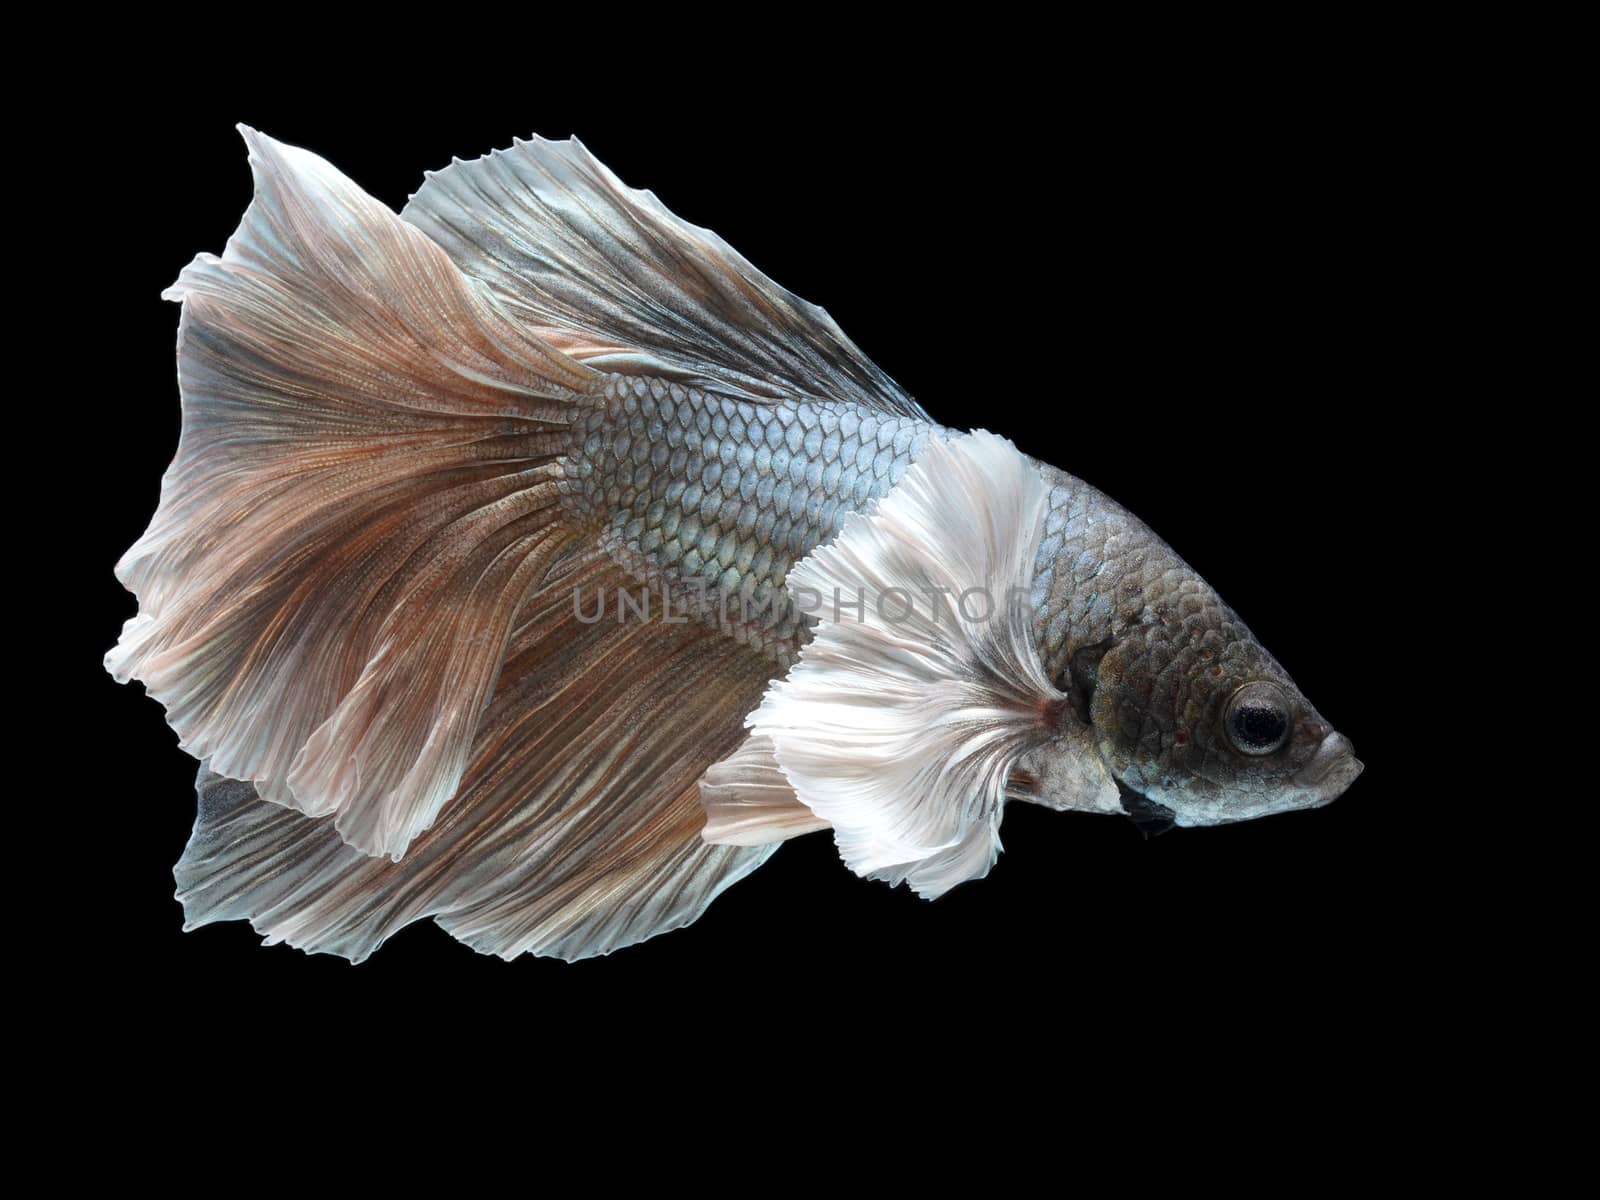 Siamese fighting fish on black background. by chadchai_k